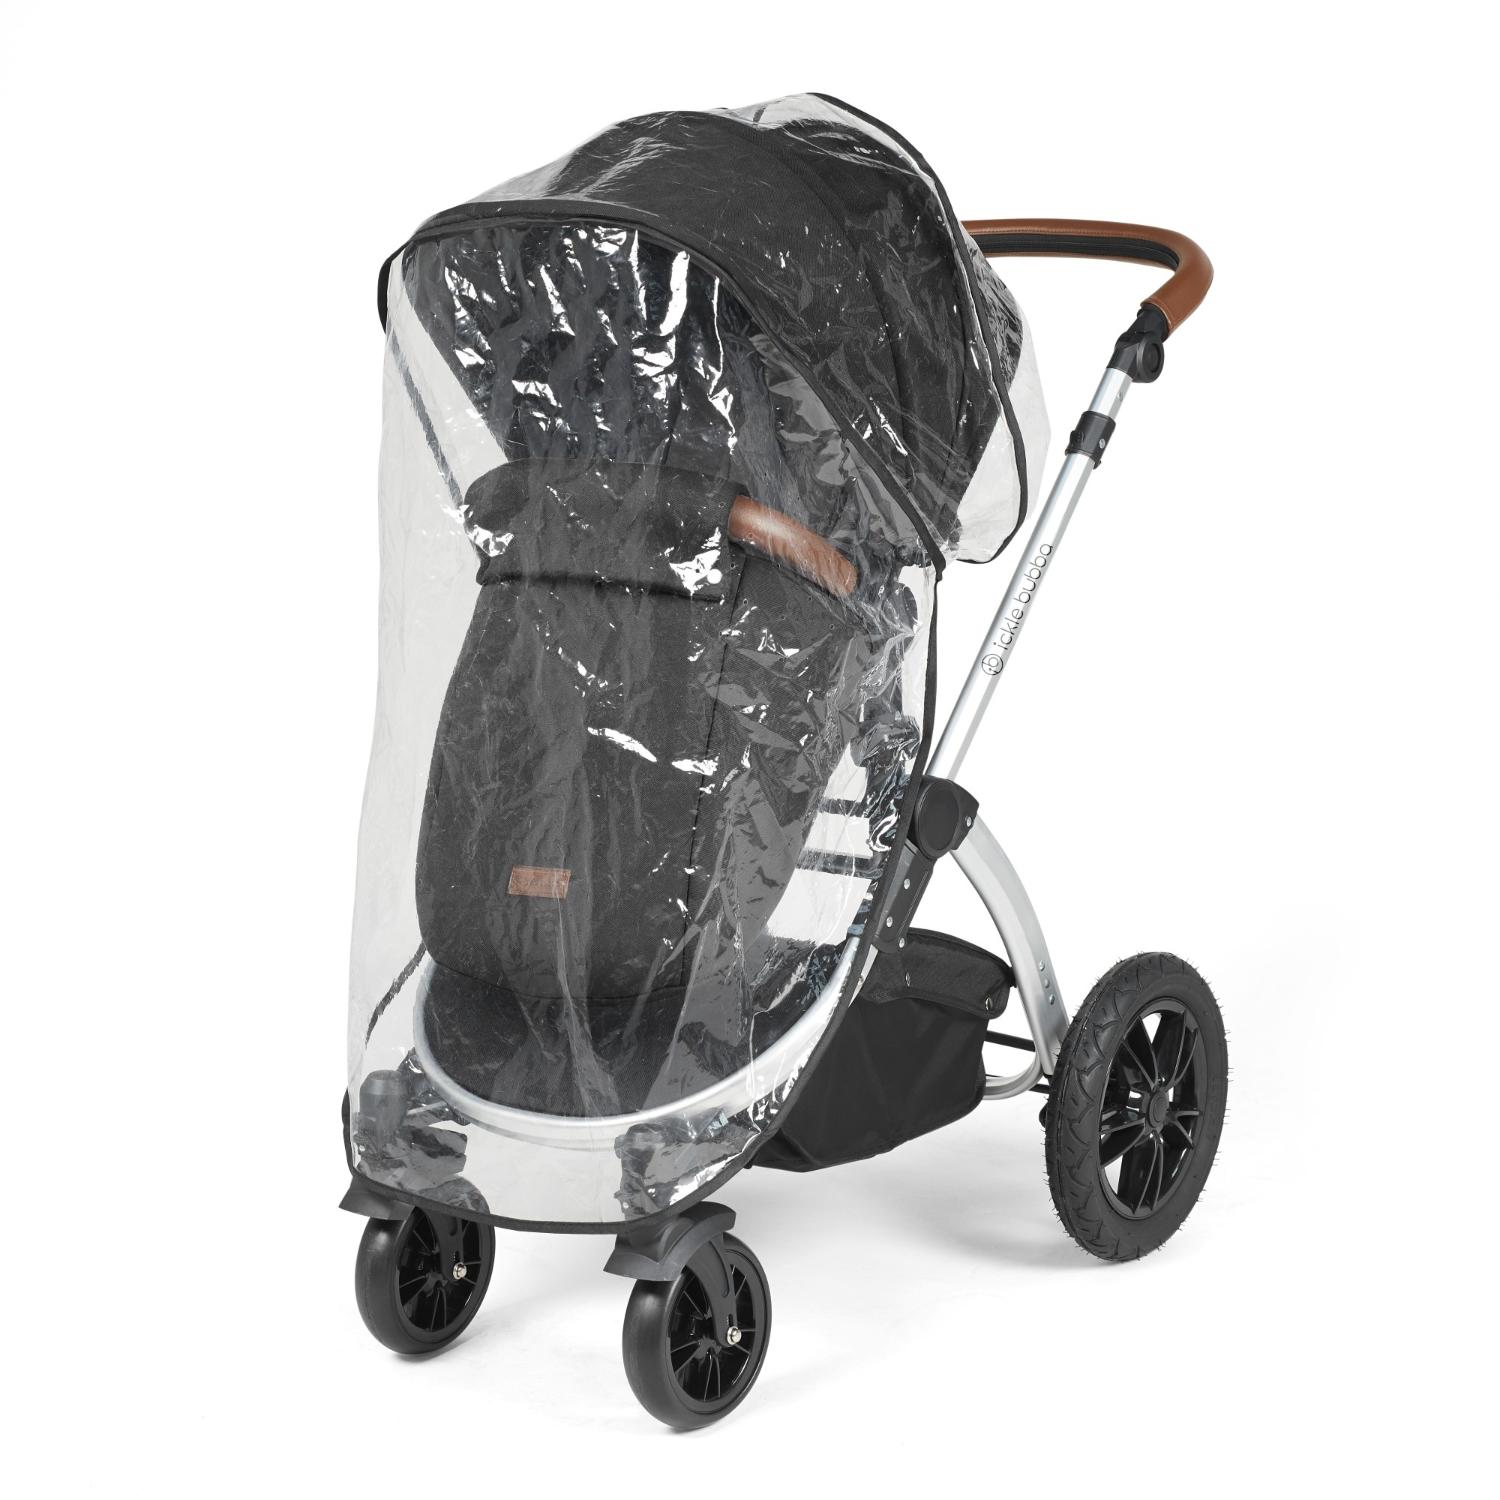 Rain cover placed on an Ickle Bubba Stomp Luxe Pushchair in Midnight black colour with silver chassis and tan handle